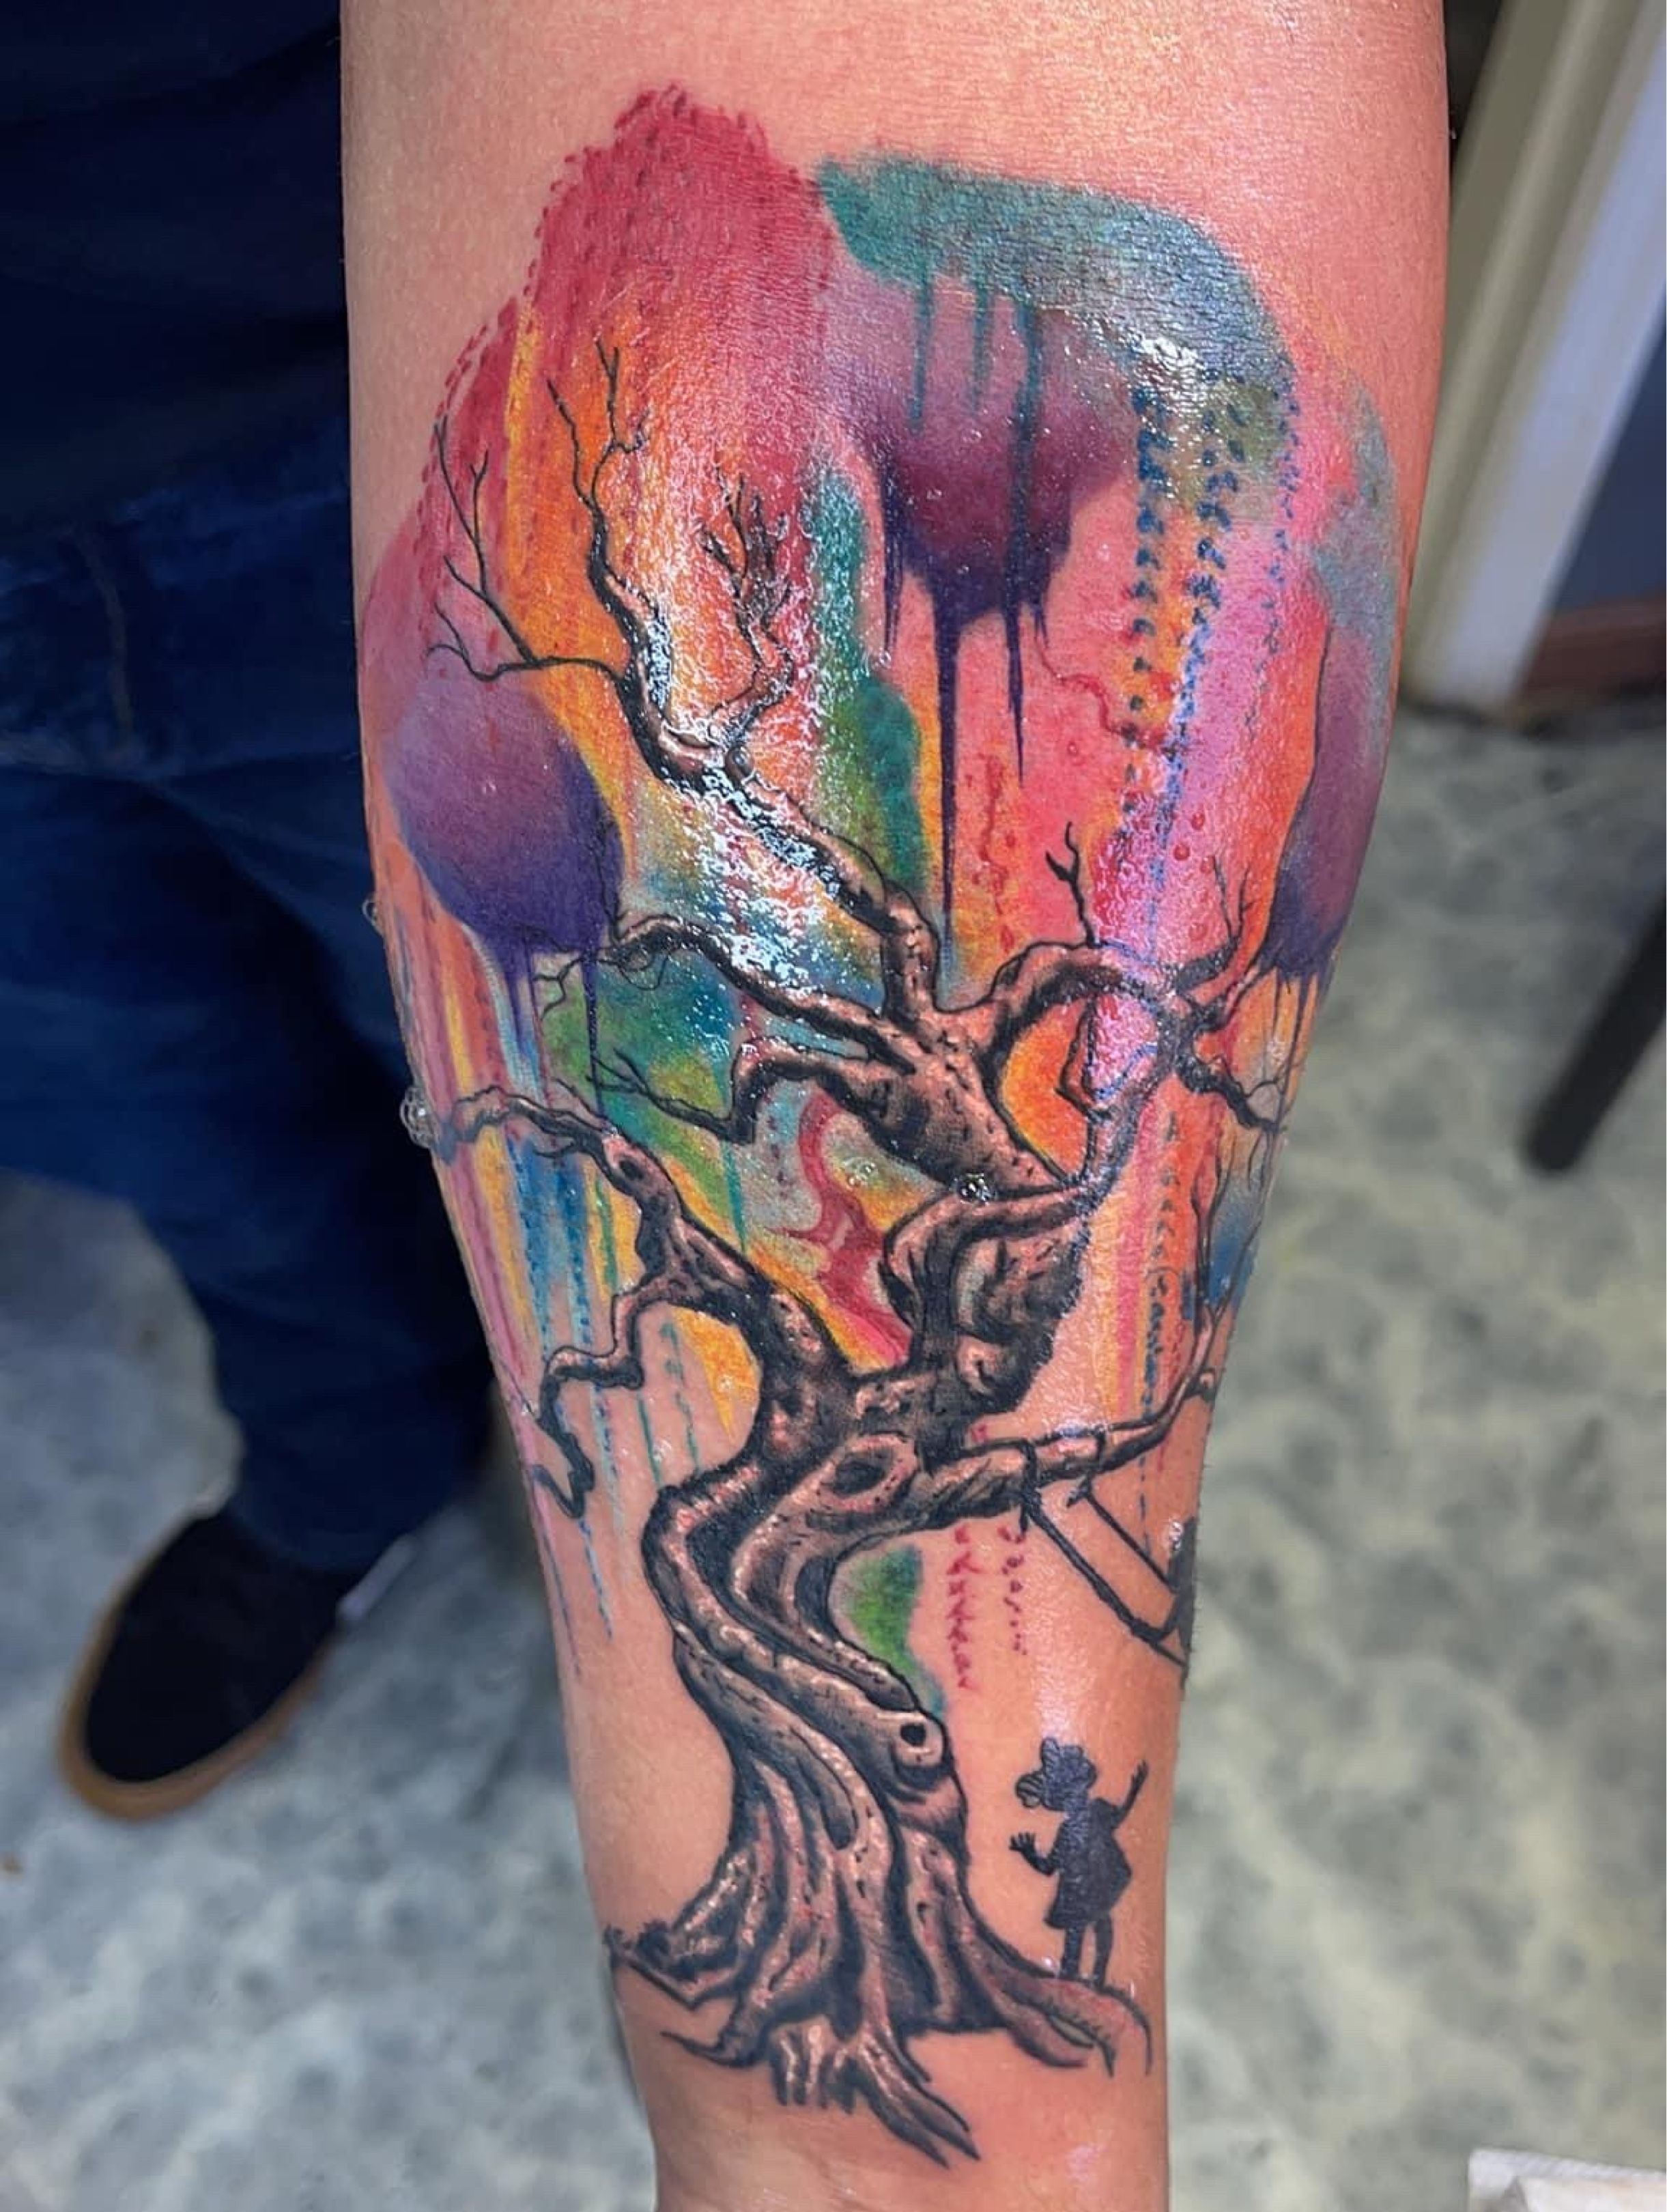 Freehand weeping willow tree tattoo on the shin